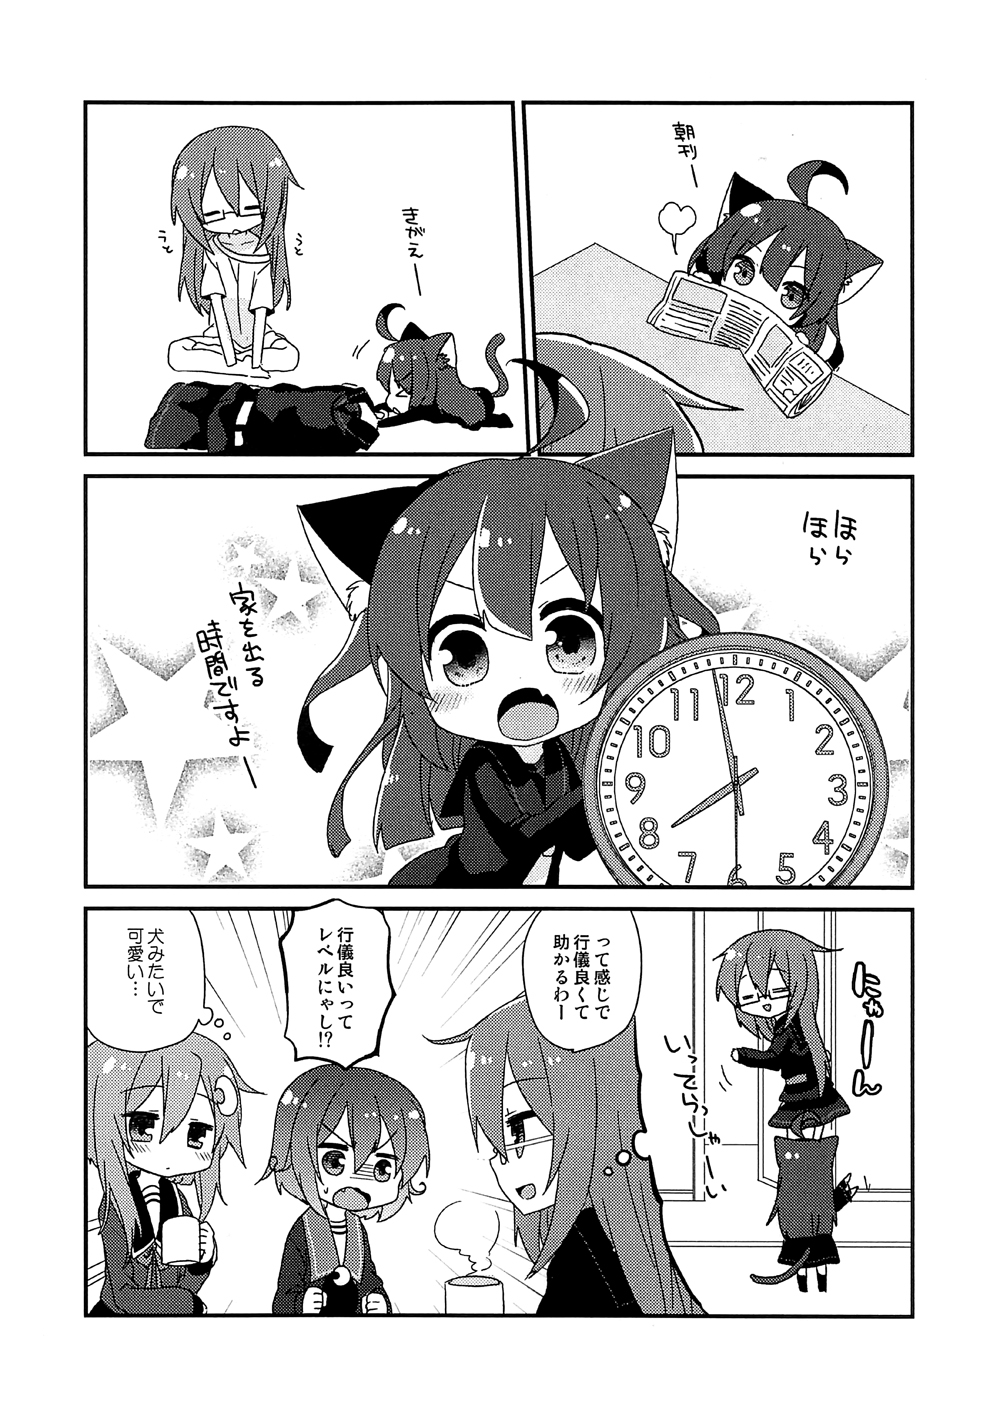 4girls animal_ears cat_ears cat_tail chibi comic greyscale highres kantai_collection kemonomimi_mode mikazuki_(kantai_collection) mochizuki_(kantai_collection) monochrome multiple_girls mutsuki_(kantai_collection) nagasioo tail translated yayoi_(kantai_collection)